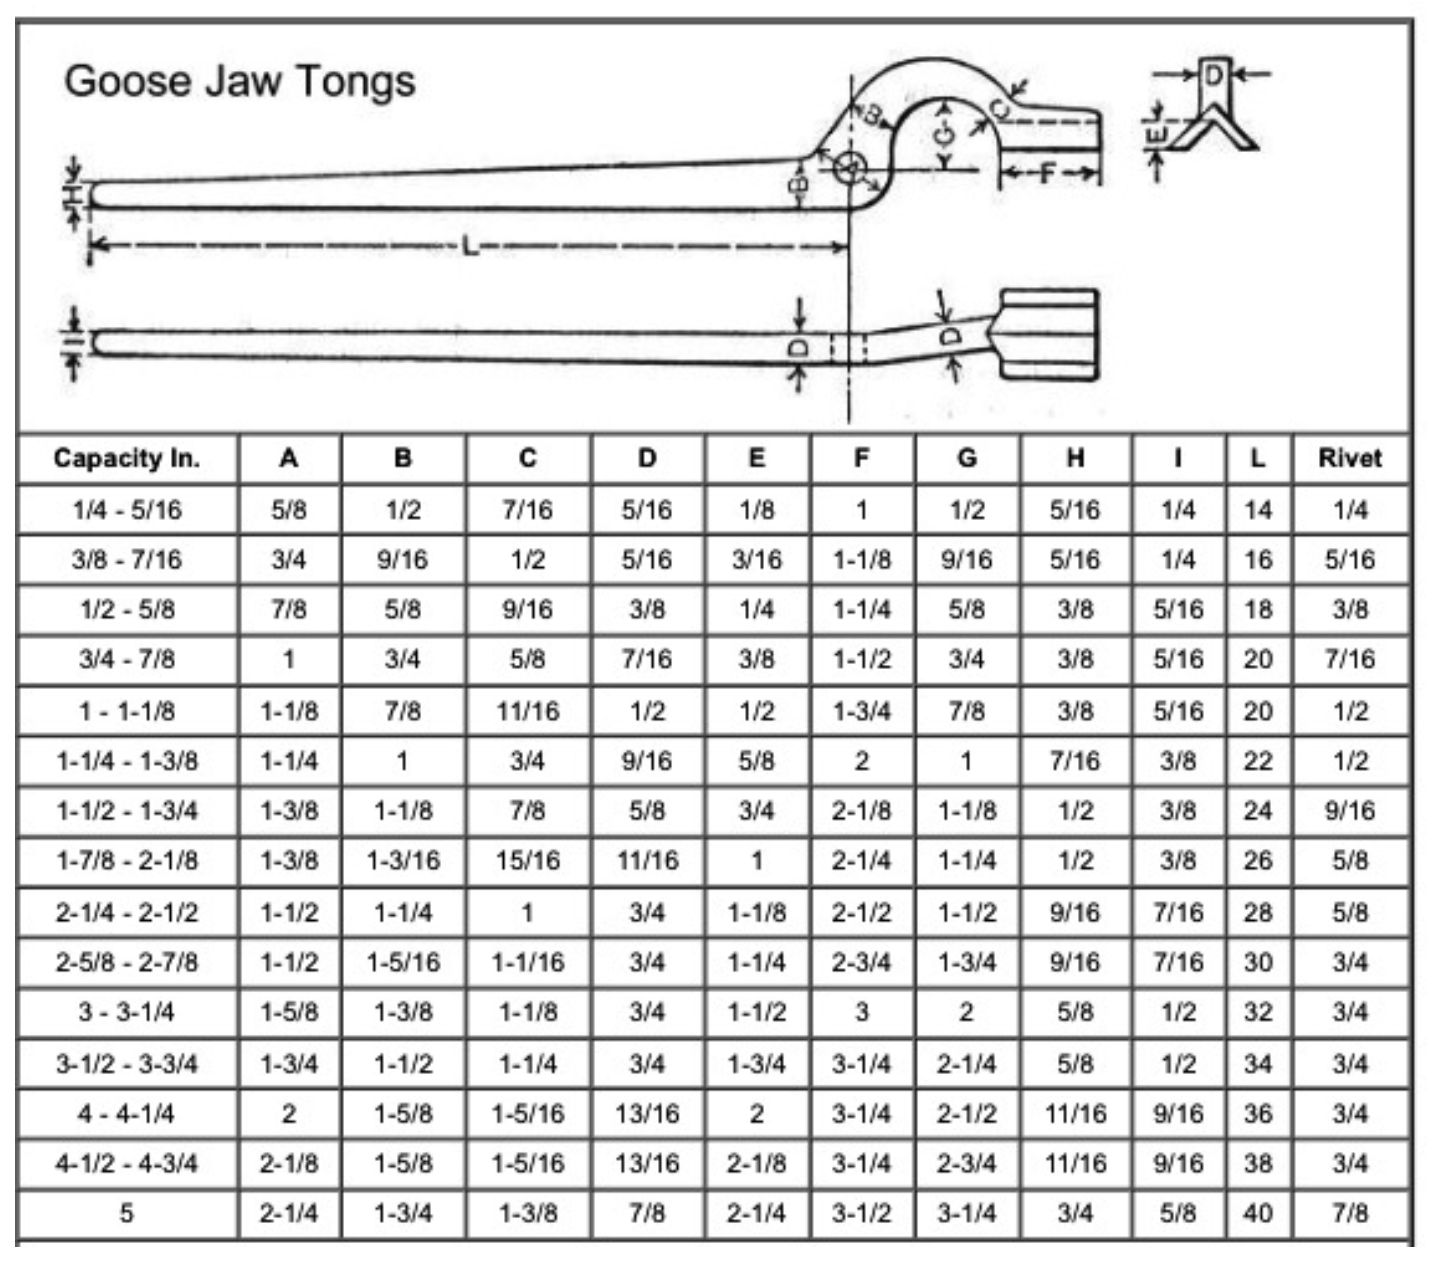 Goose Jaw Tongs Table of jaw sizing